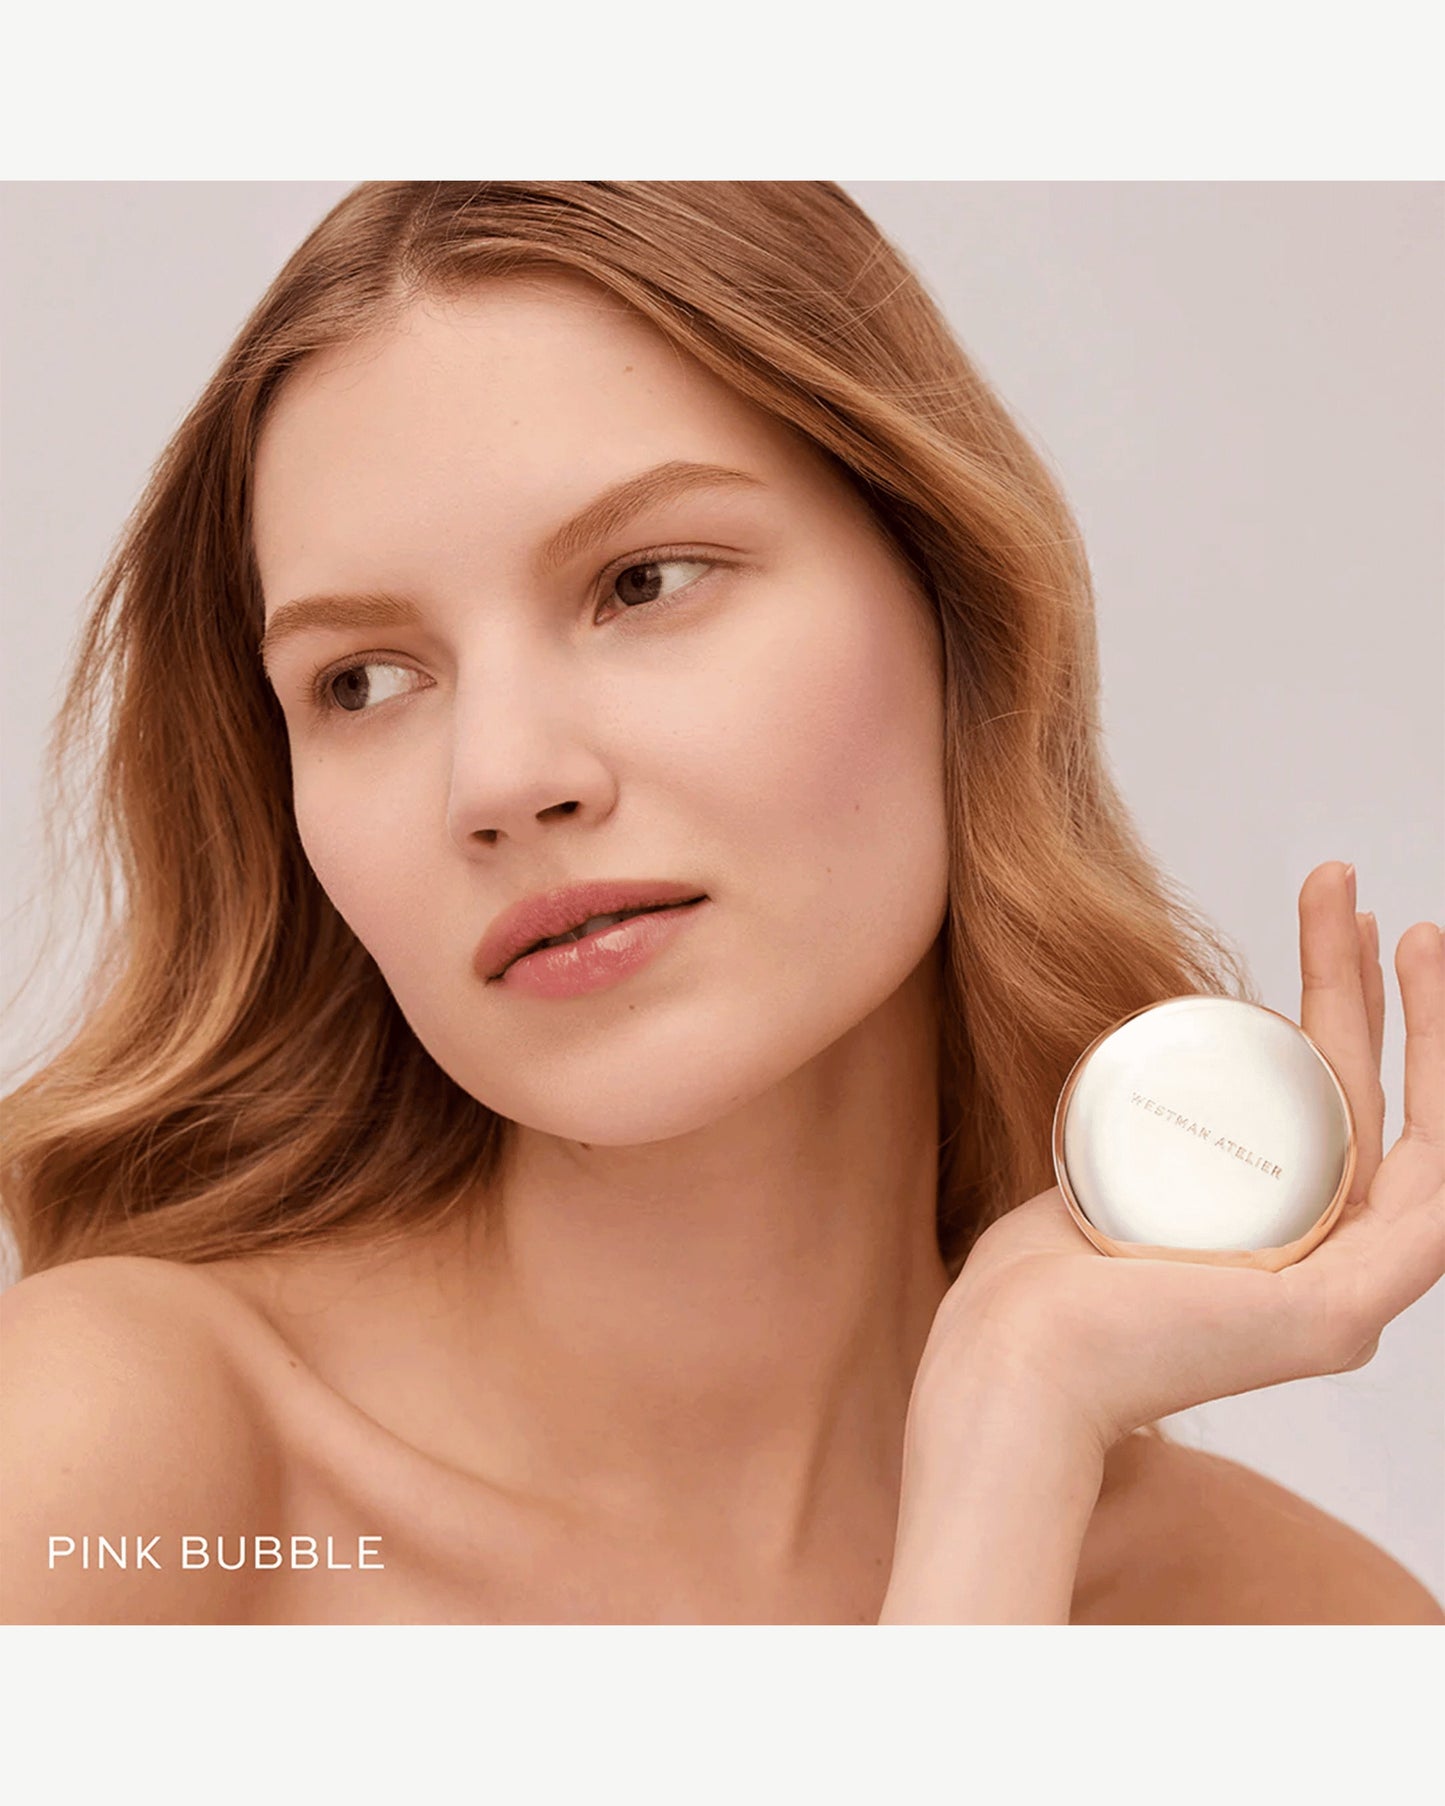 	Pink Bubble (for fair-light complexions)